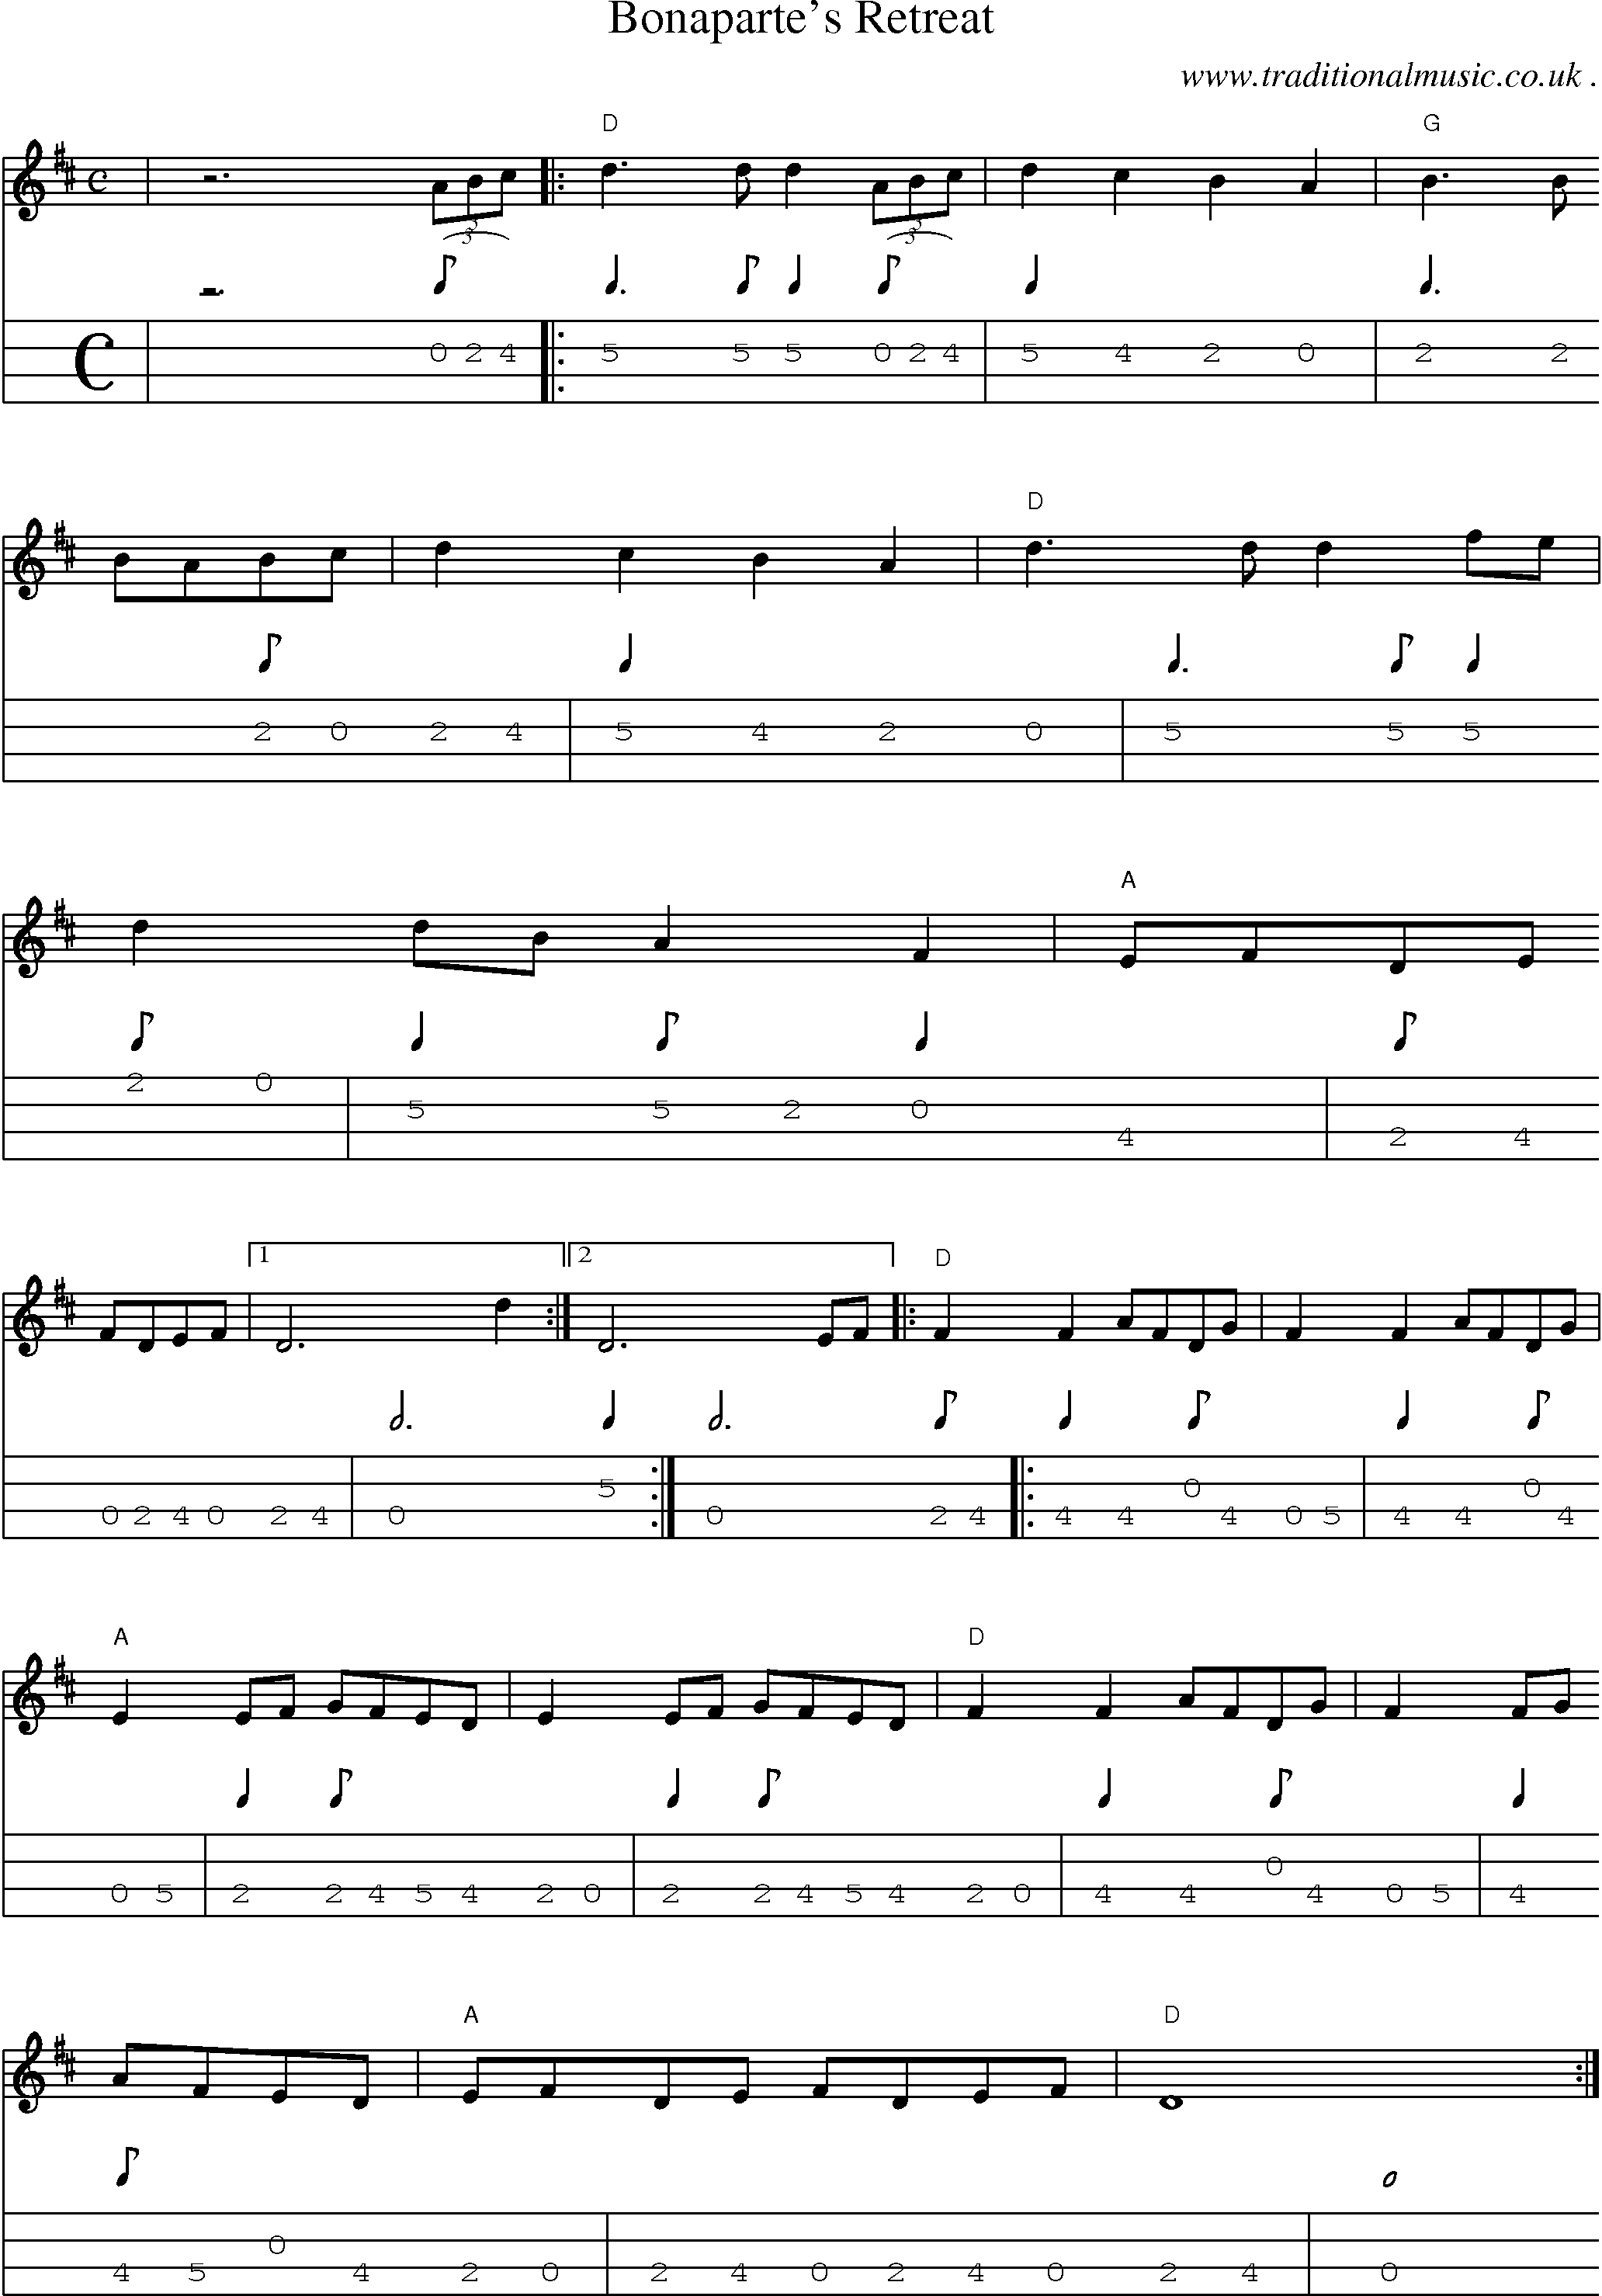 Music Score and Guitar Tabs for Bonapartes Retreat